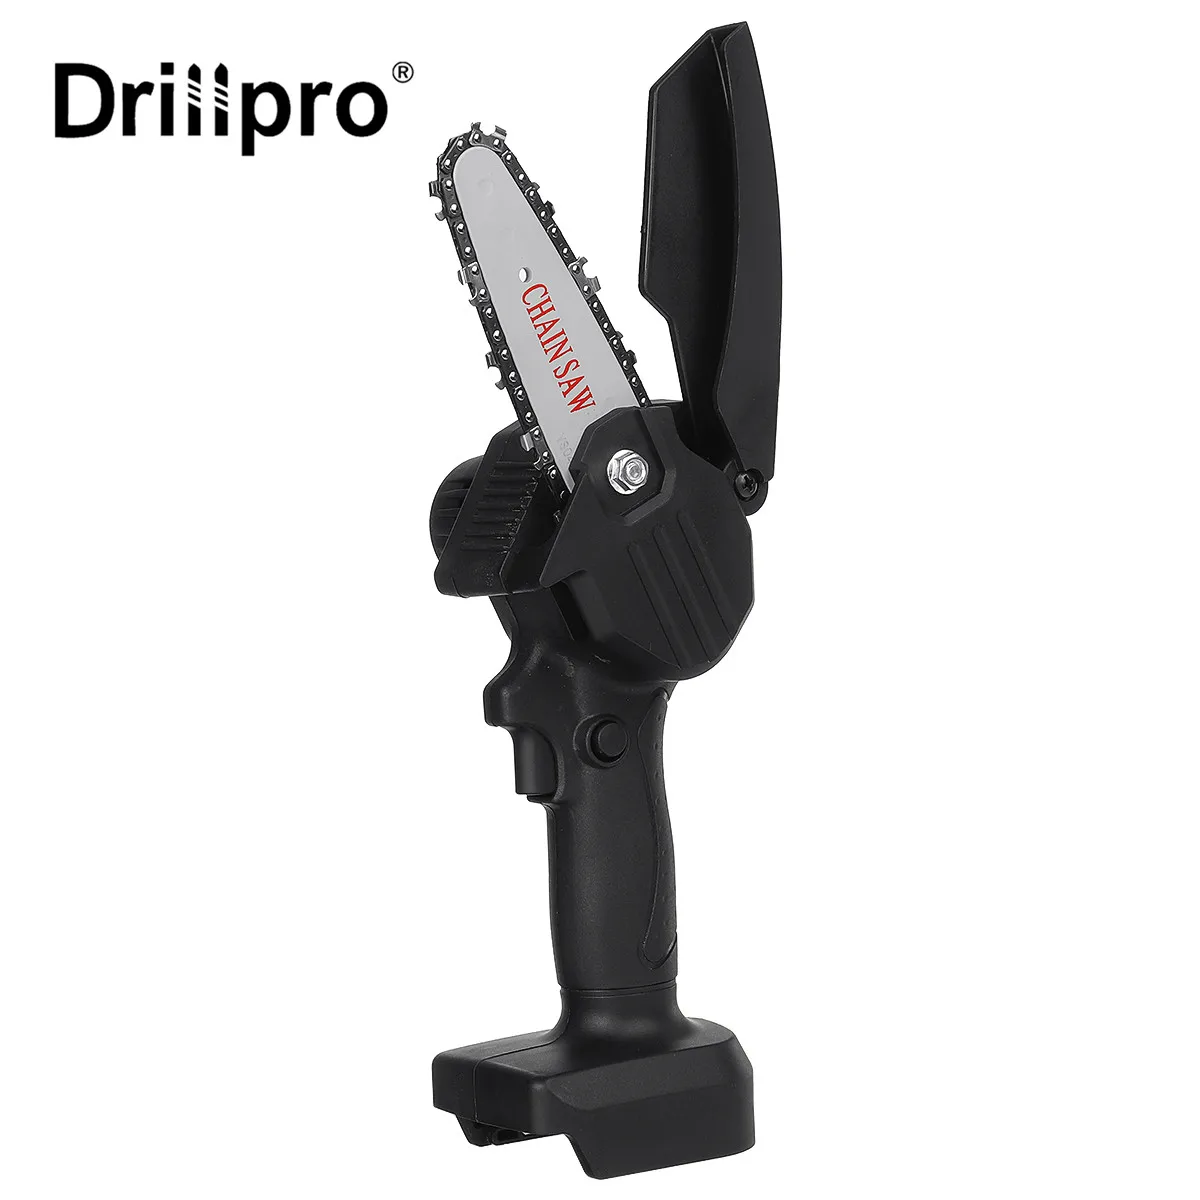 

Drillpro 4" Mini Electric Saw Electric Chain Saw Pruning One-handed Garden Tool Woodworking Power Tools for Makita 18V Batter y